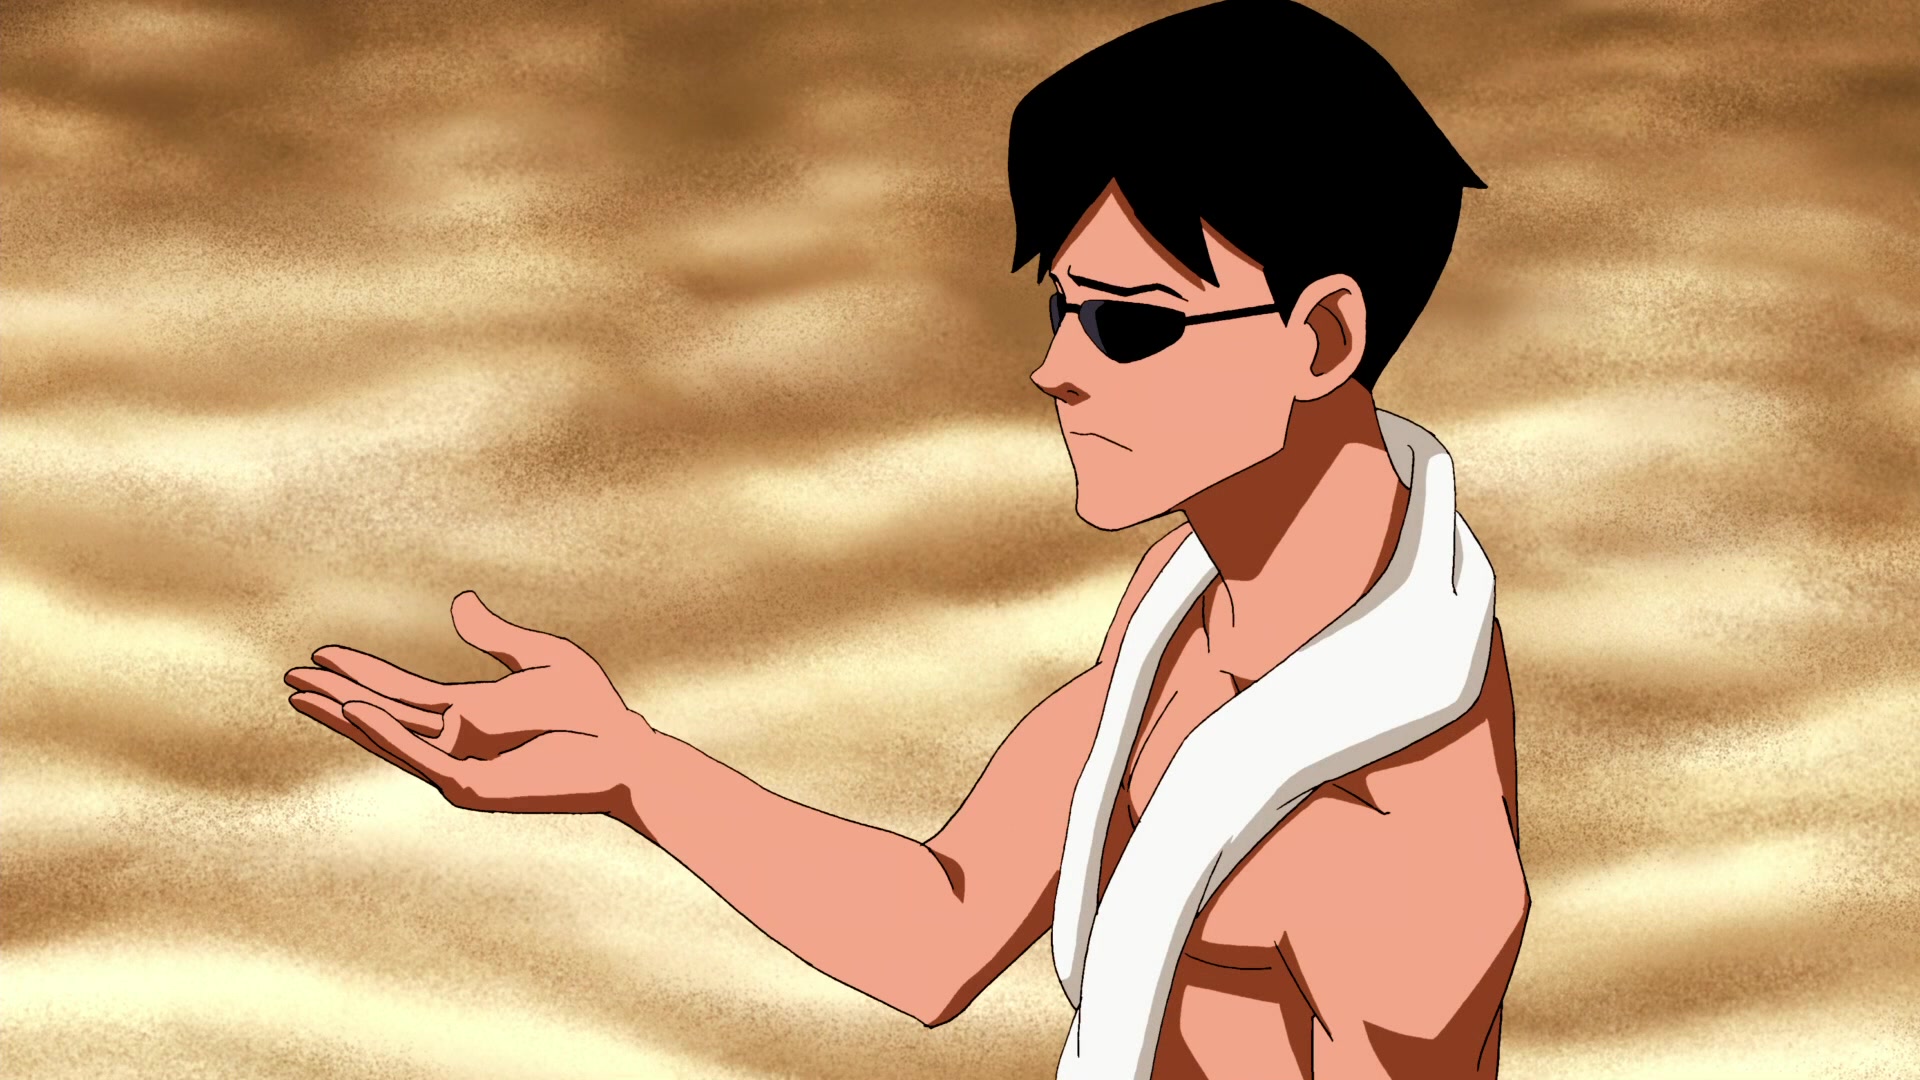 Black Hair Boy Dick Grayson Hand Sand Young Justice 1920x1080